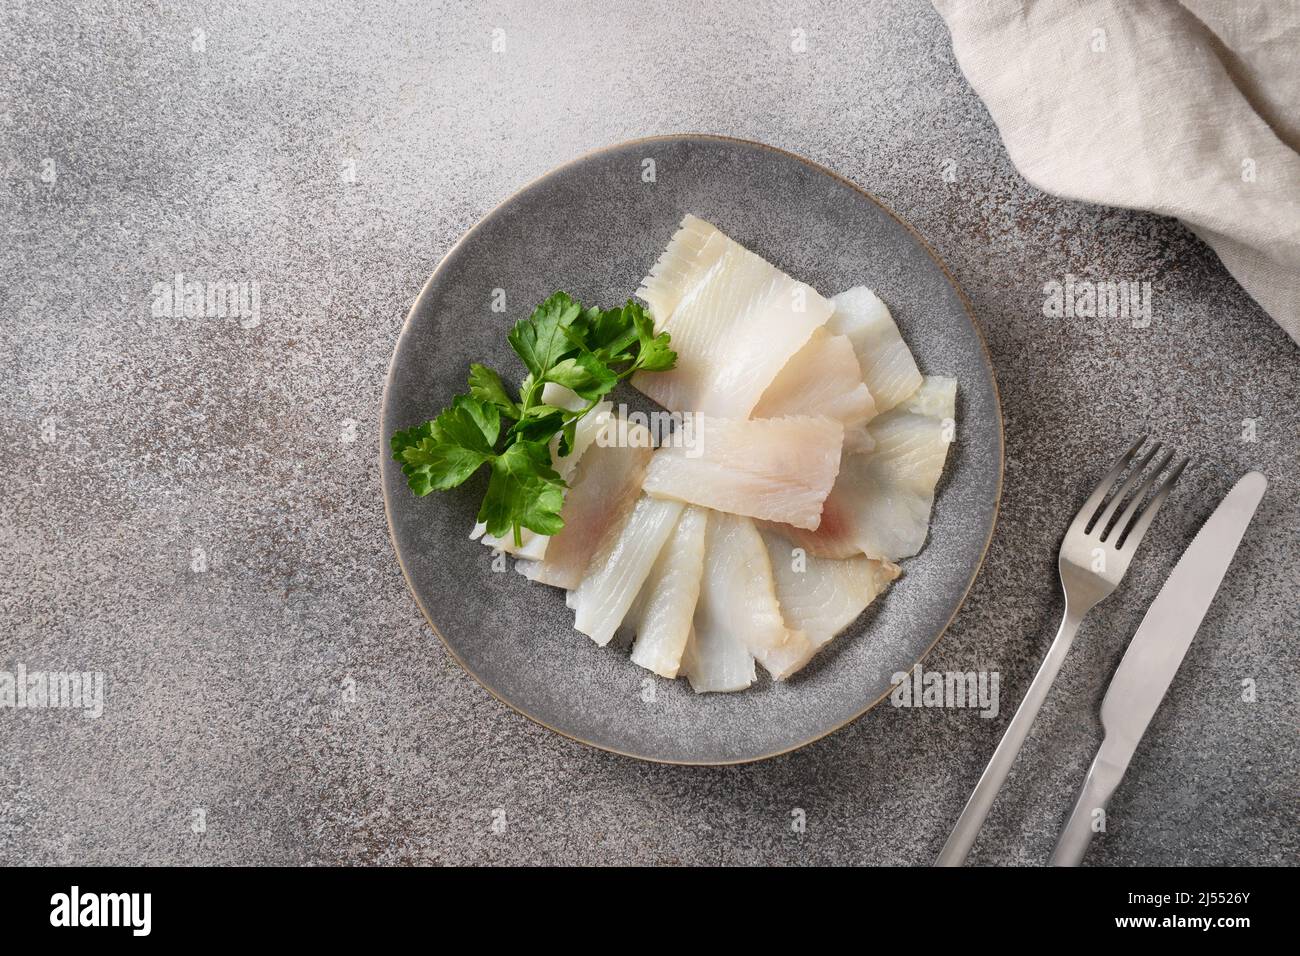 Delicious smoked halibut slices served with parsley on gray background. View from above. Copy space. Stock Photo